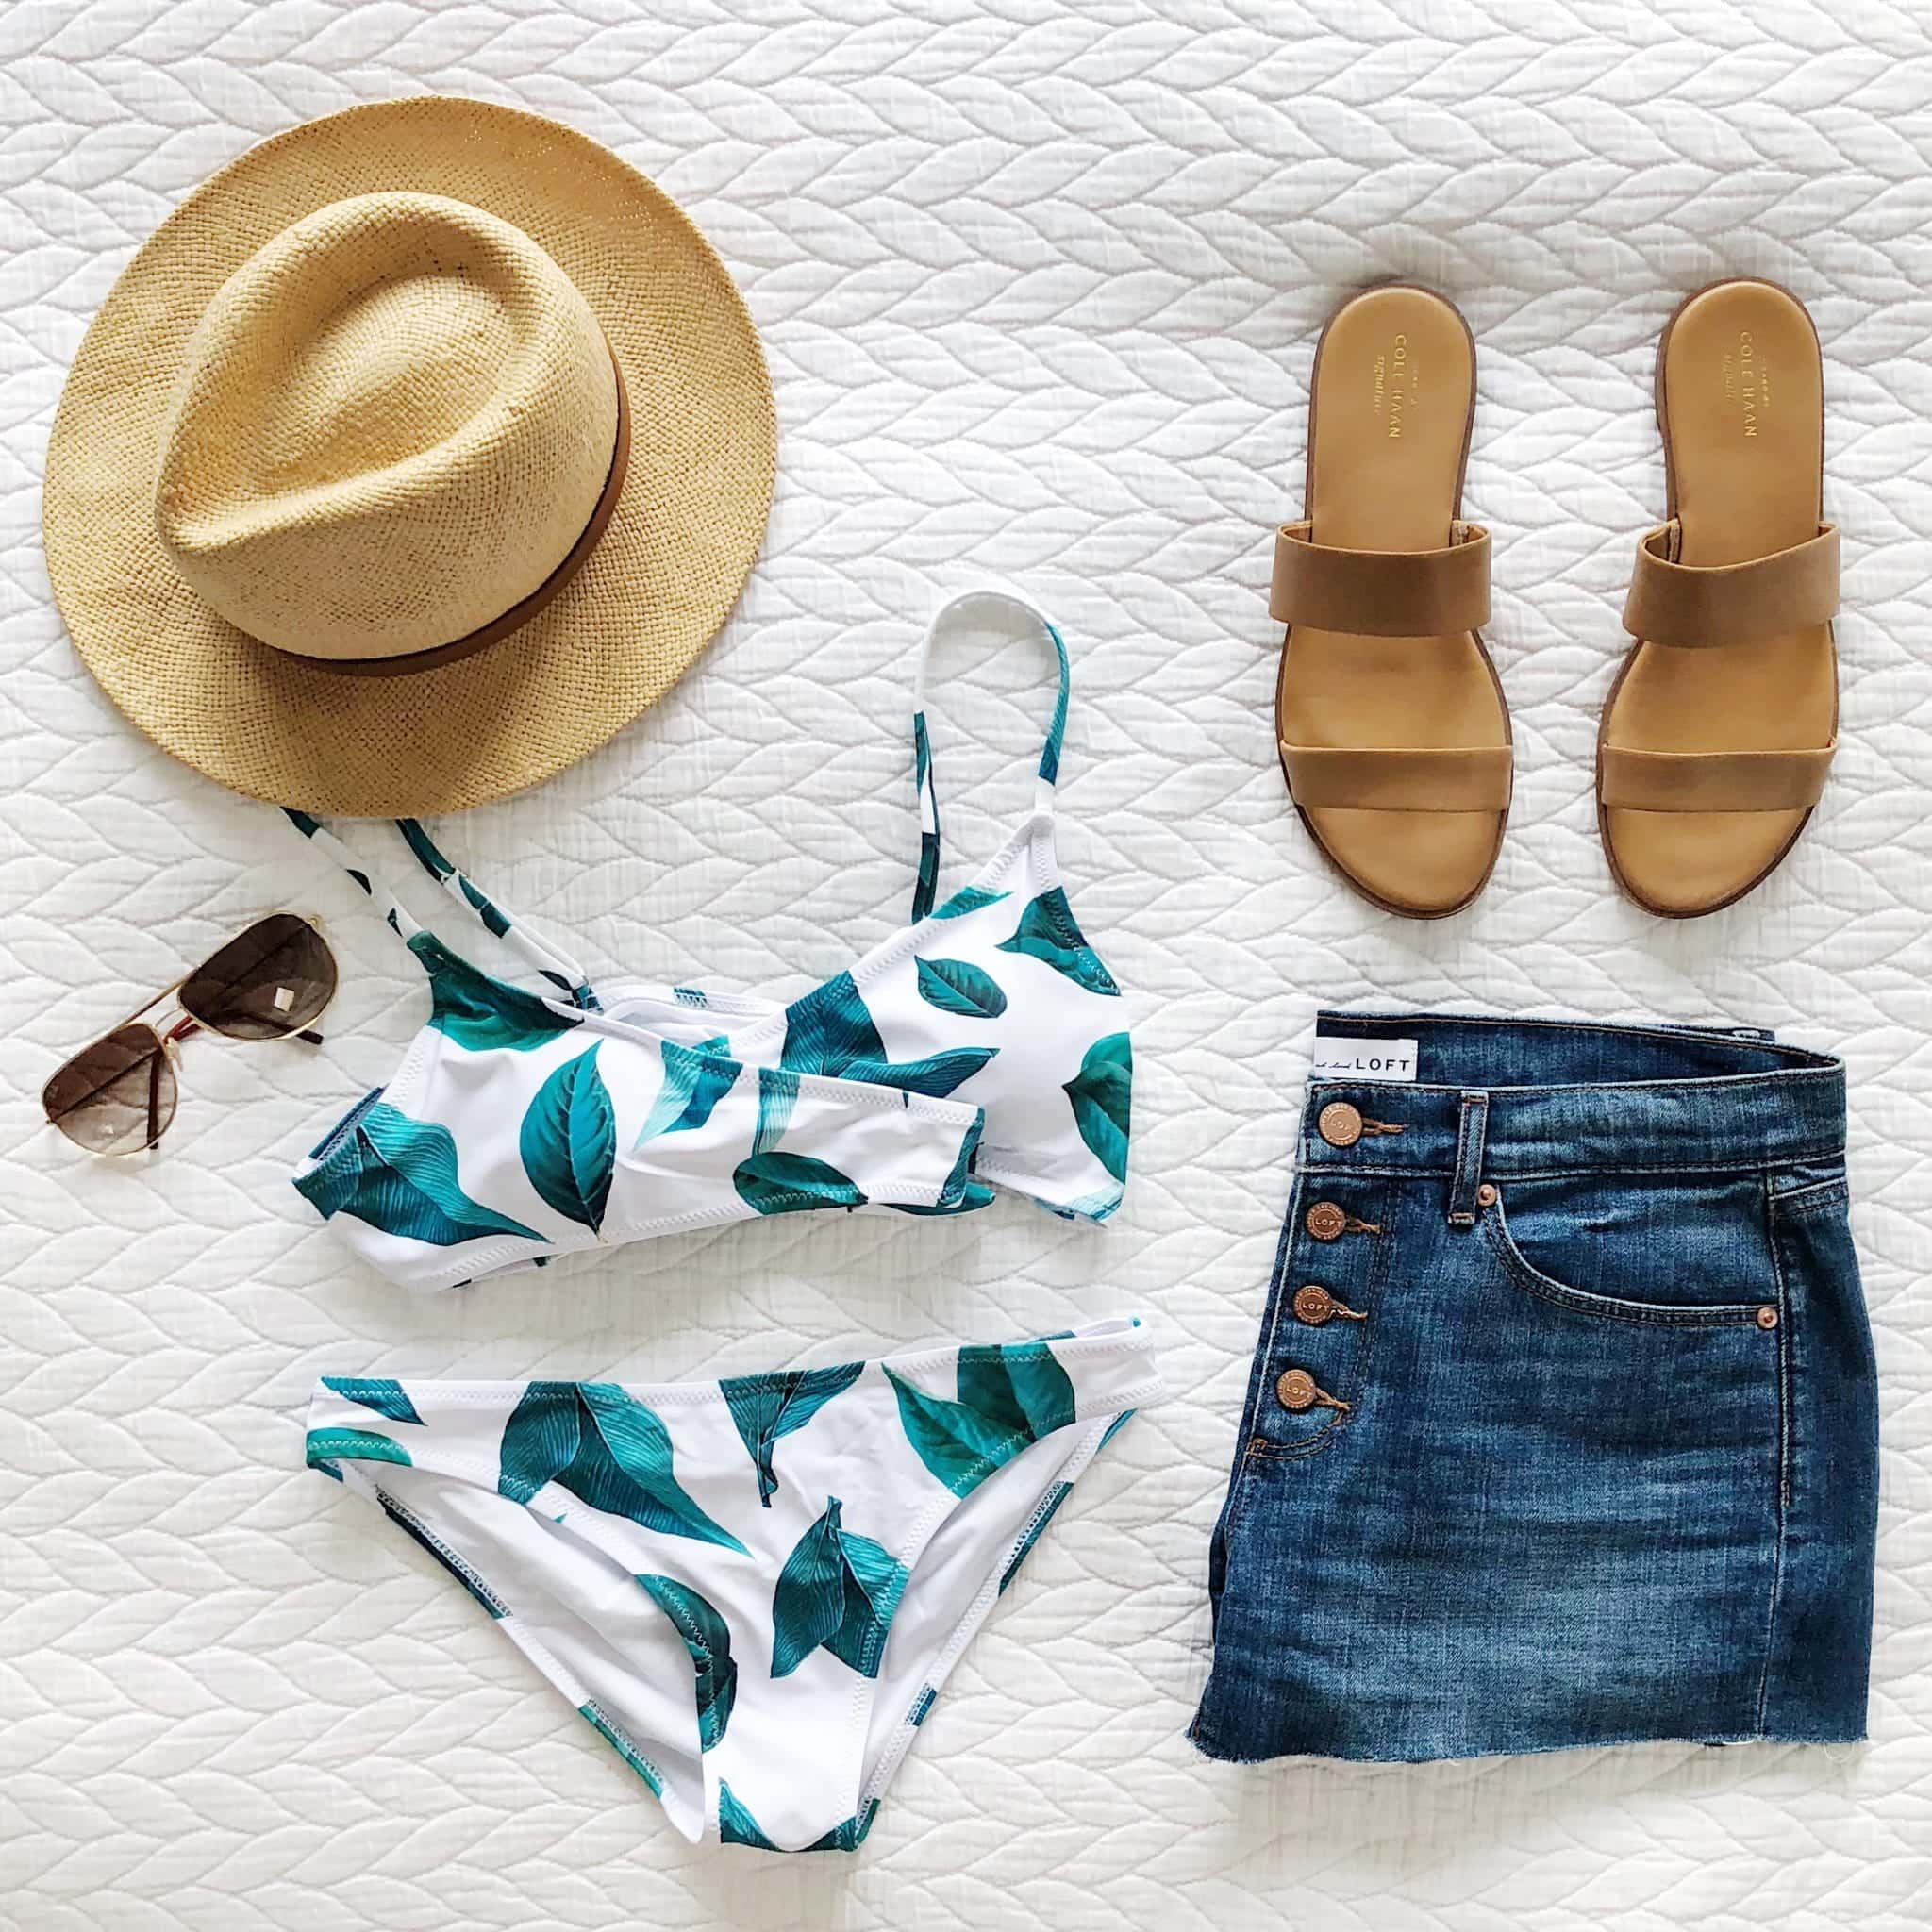 Swimming Suits We Want to Wear for Summer | The DIY Playbook